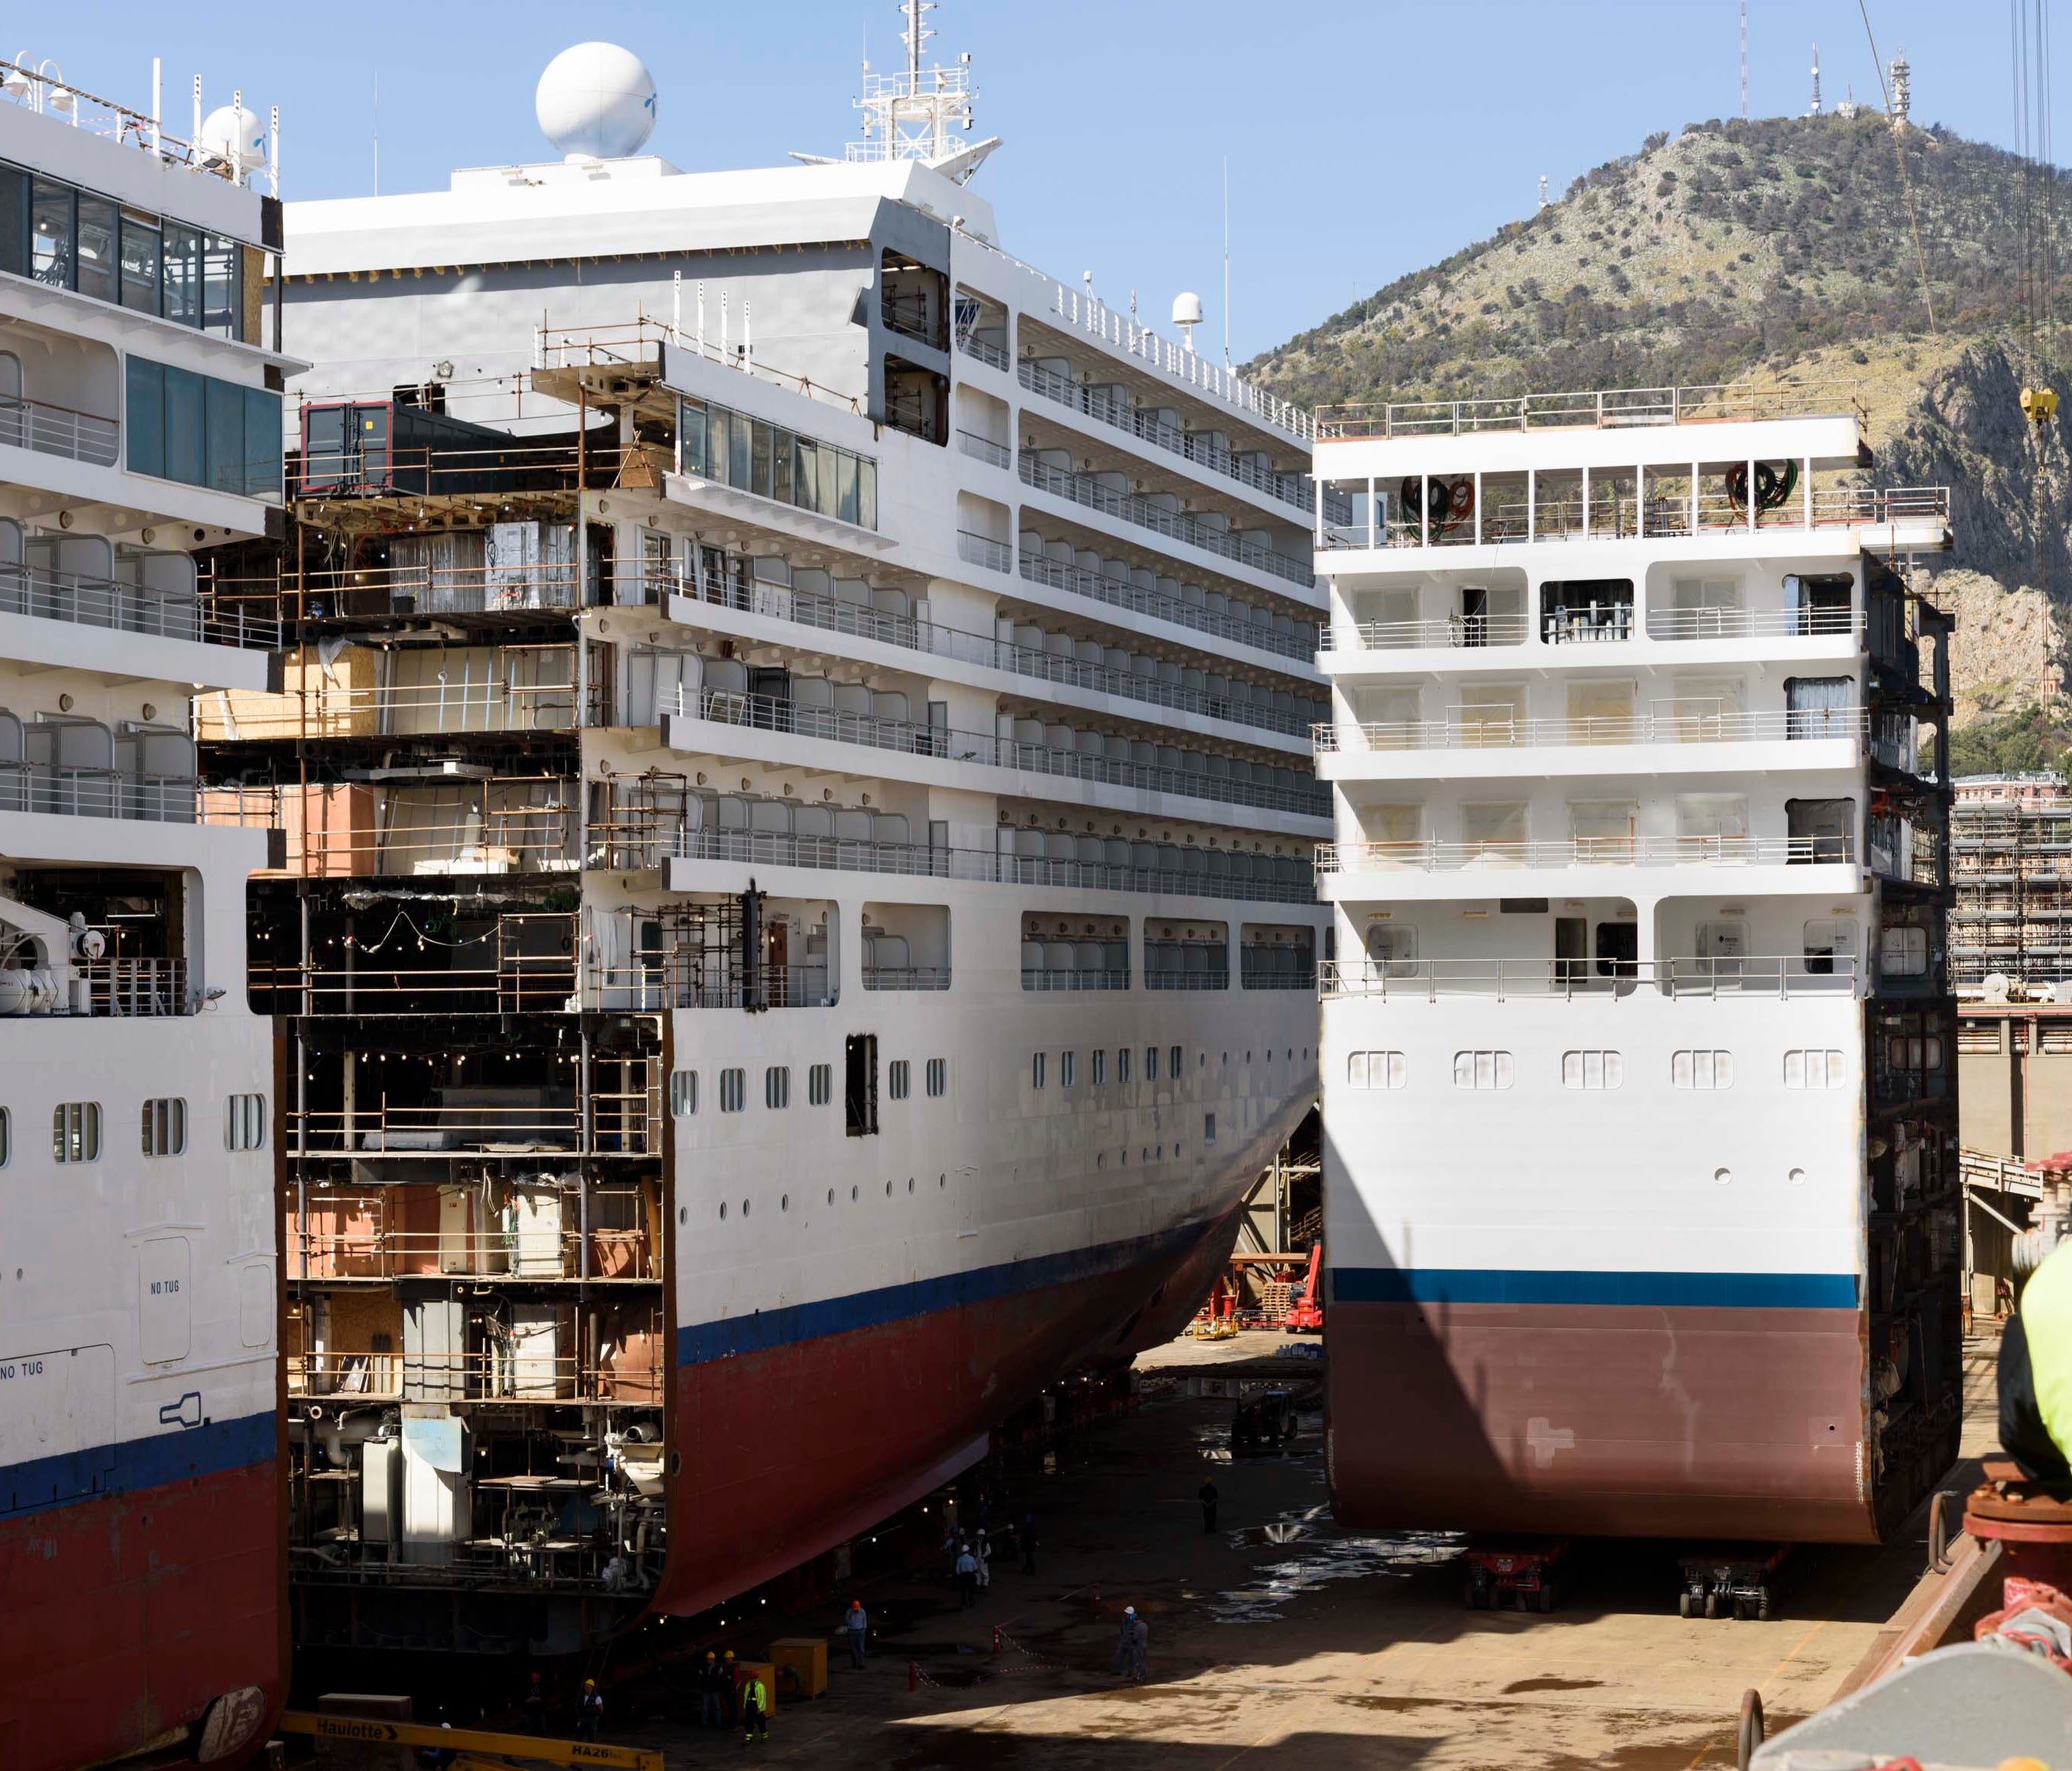 A new, 49-foot-long section is moved into position during a project to lengthen Silversea Cruises' Silver Spirit.